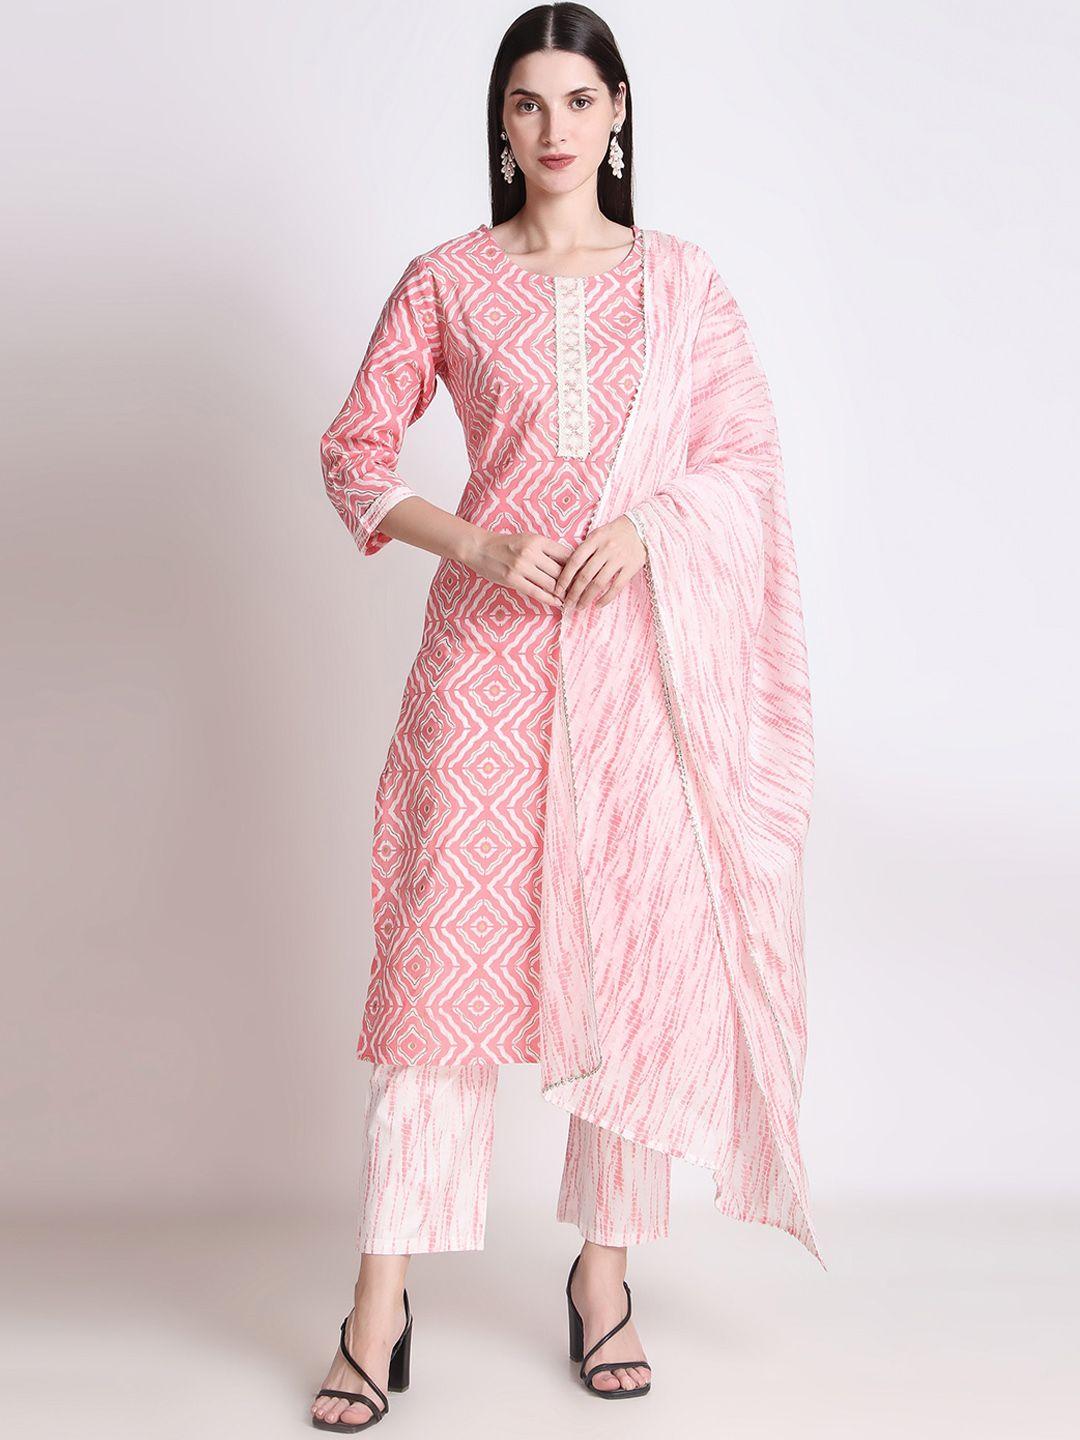 ichaa floral printed pure cotton regular kurta with trousers & with dupatta